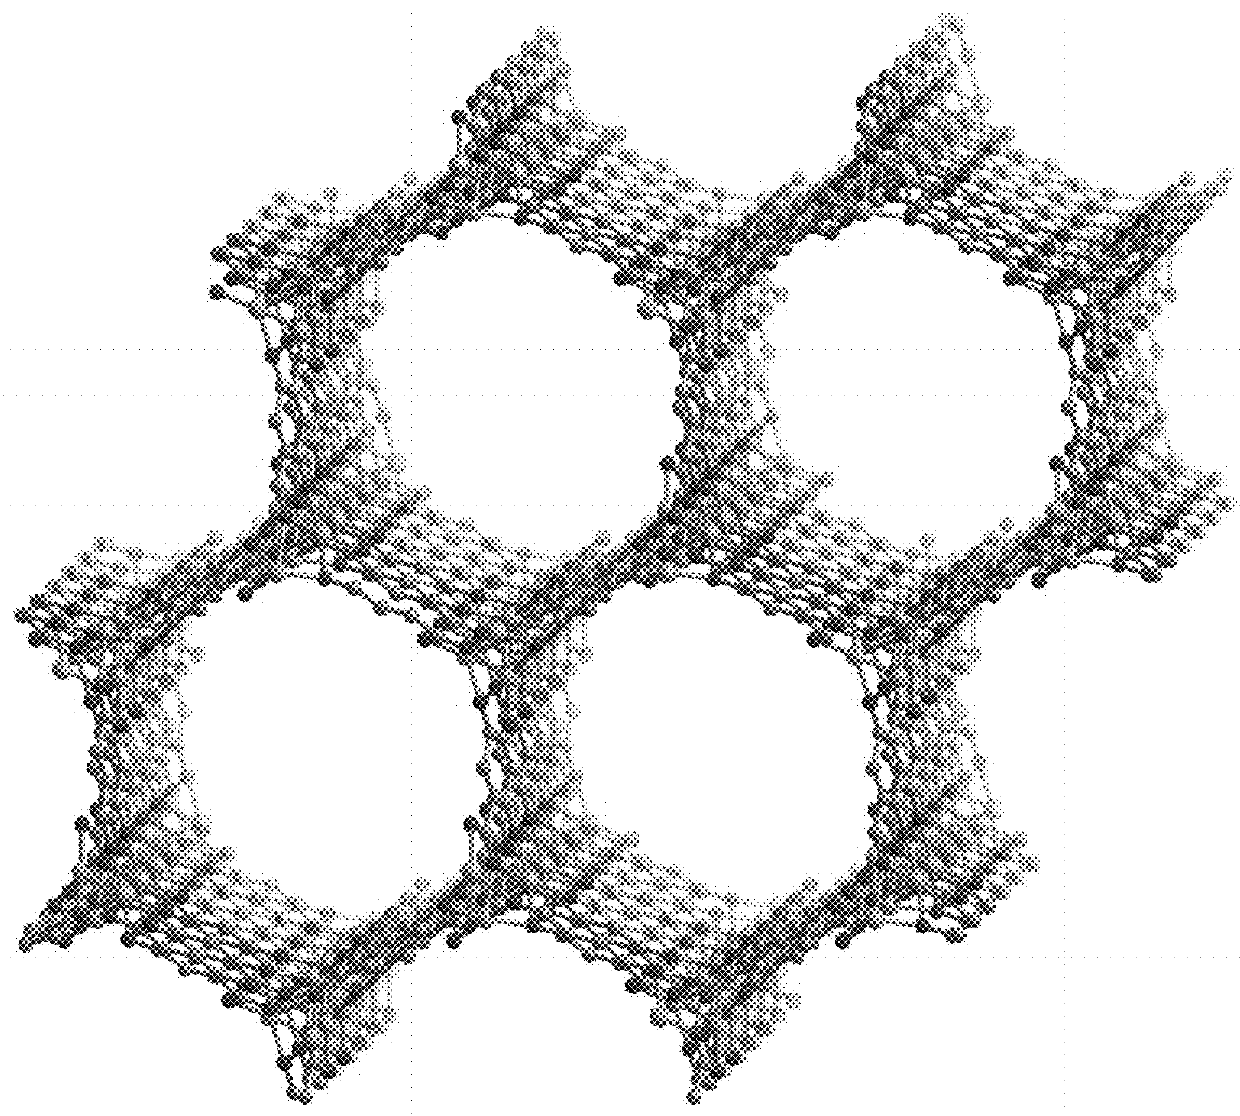 Gas separations with redox-active metal-organic frameworks